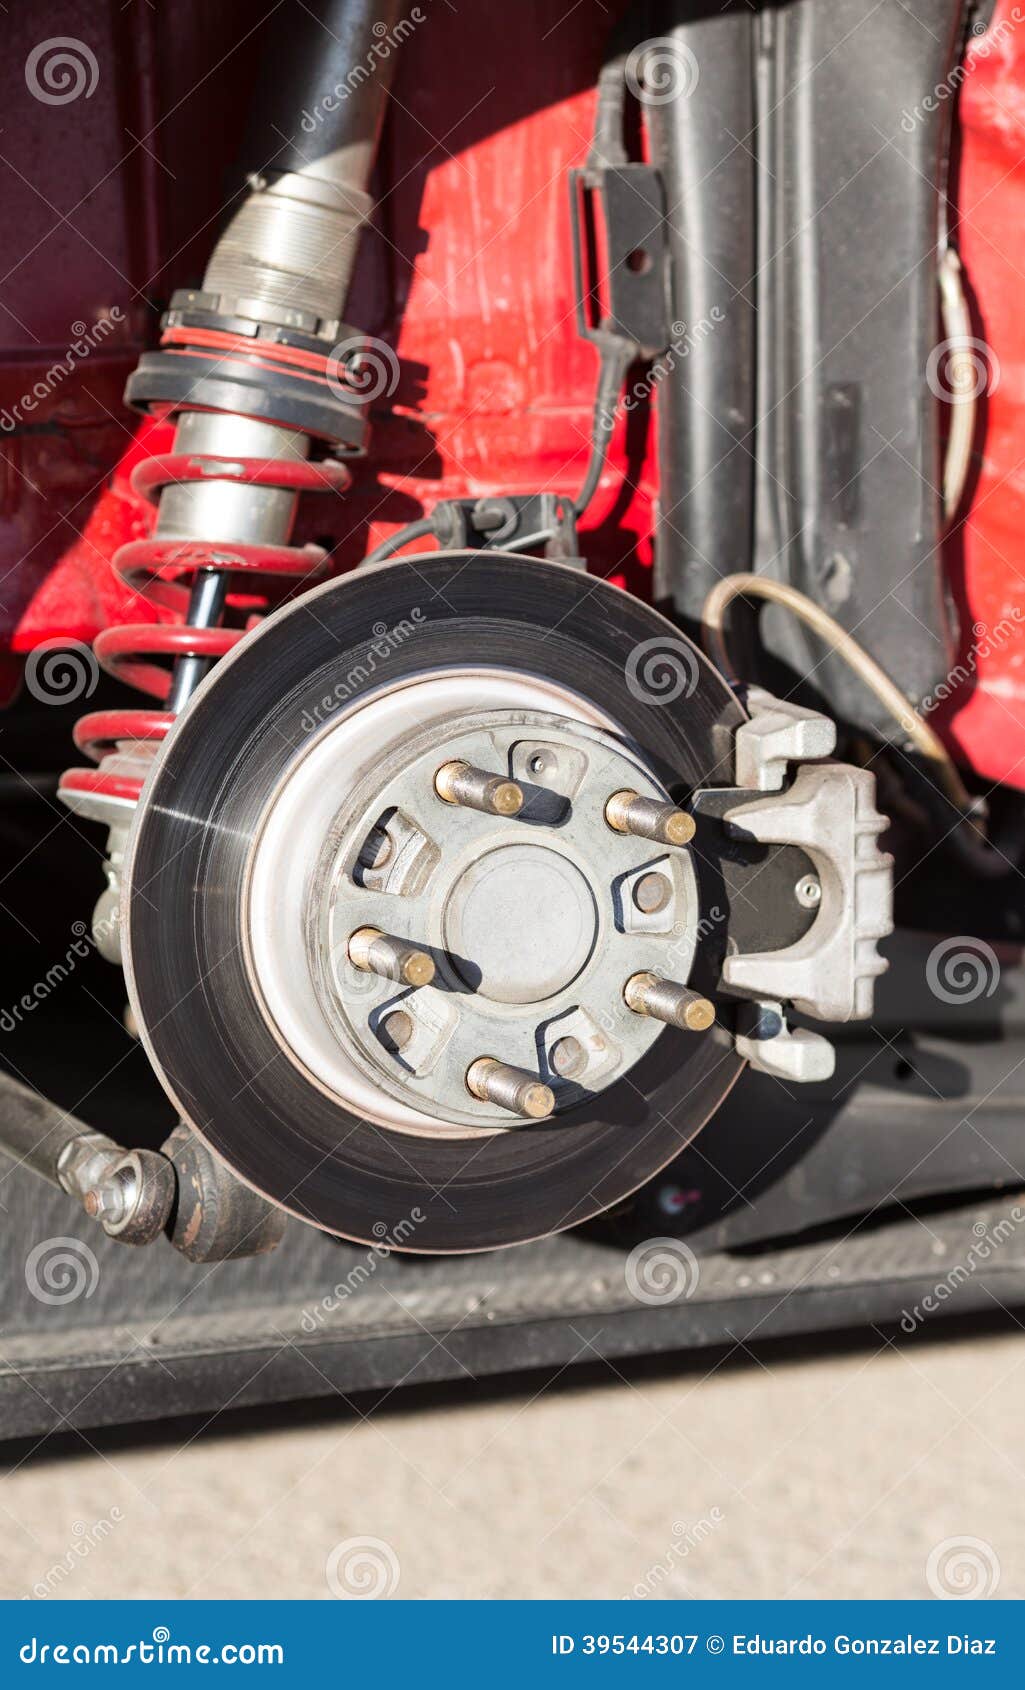 clipart of car brakes - photo #45